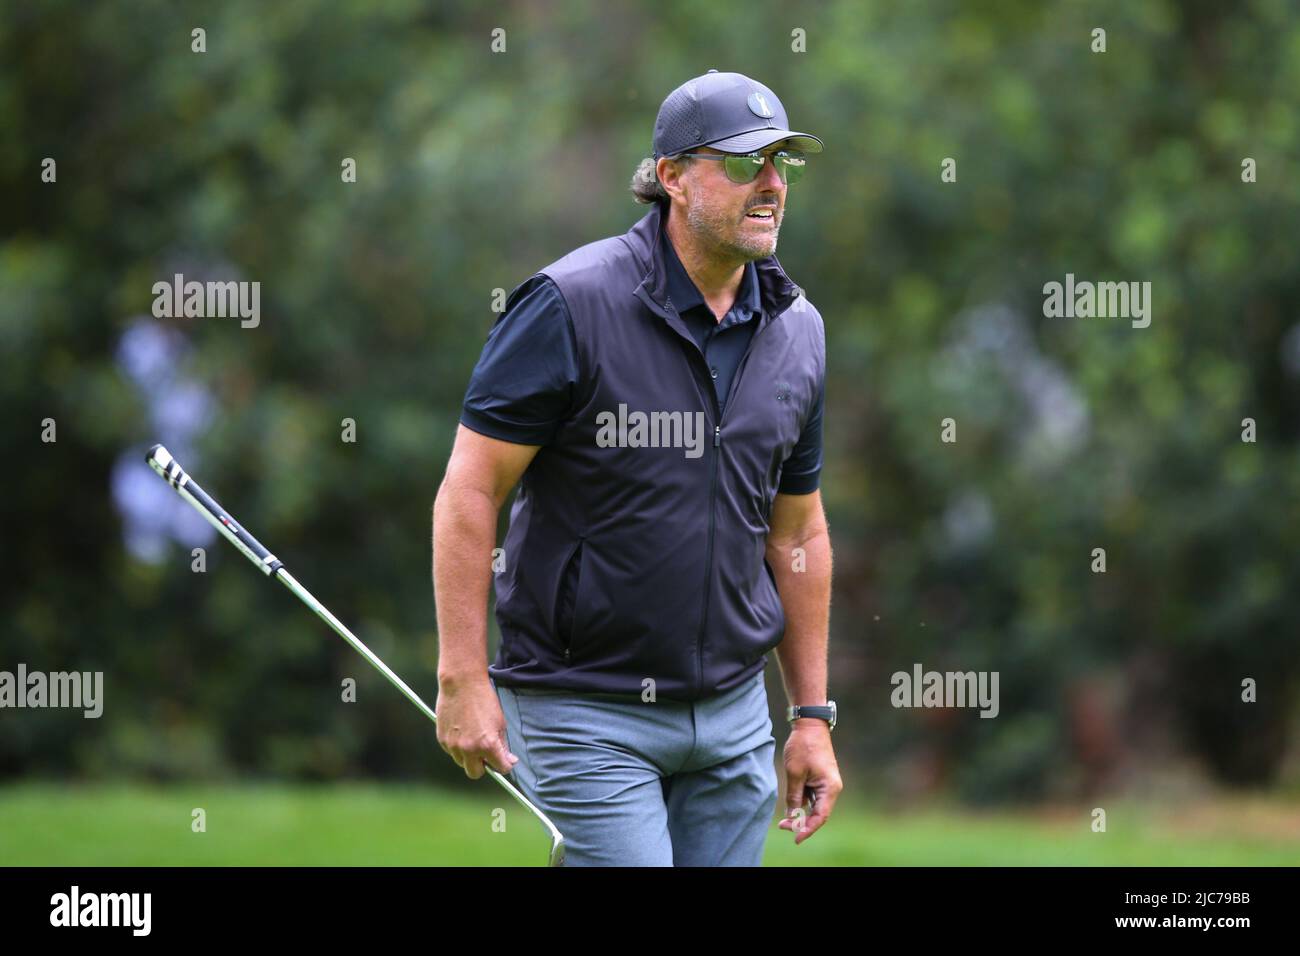 ST ALBANS, ENGLAND - JUNE 09: Phil Mickelson of the United States walks down the 3rd hole during day one of the LIV Golf Invitational at The Centurion Club on June 9, 2022 in St Albans, England. (MB Media) Stock Photo